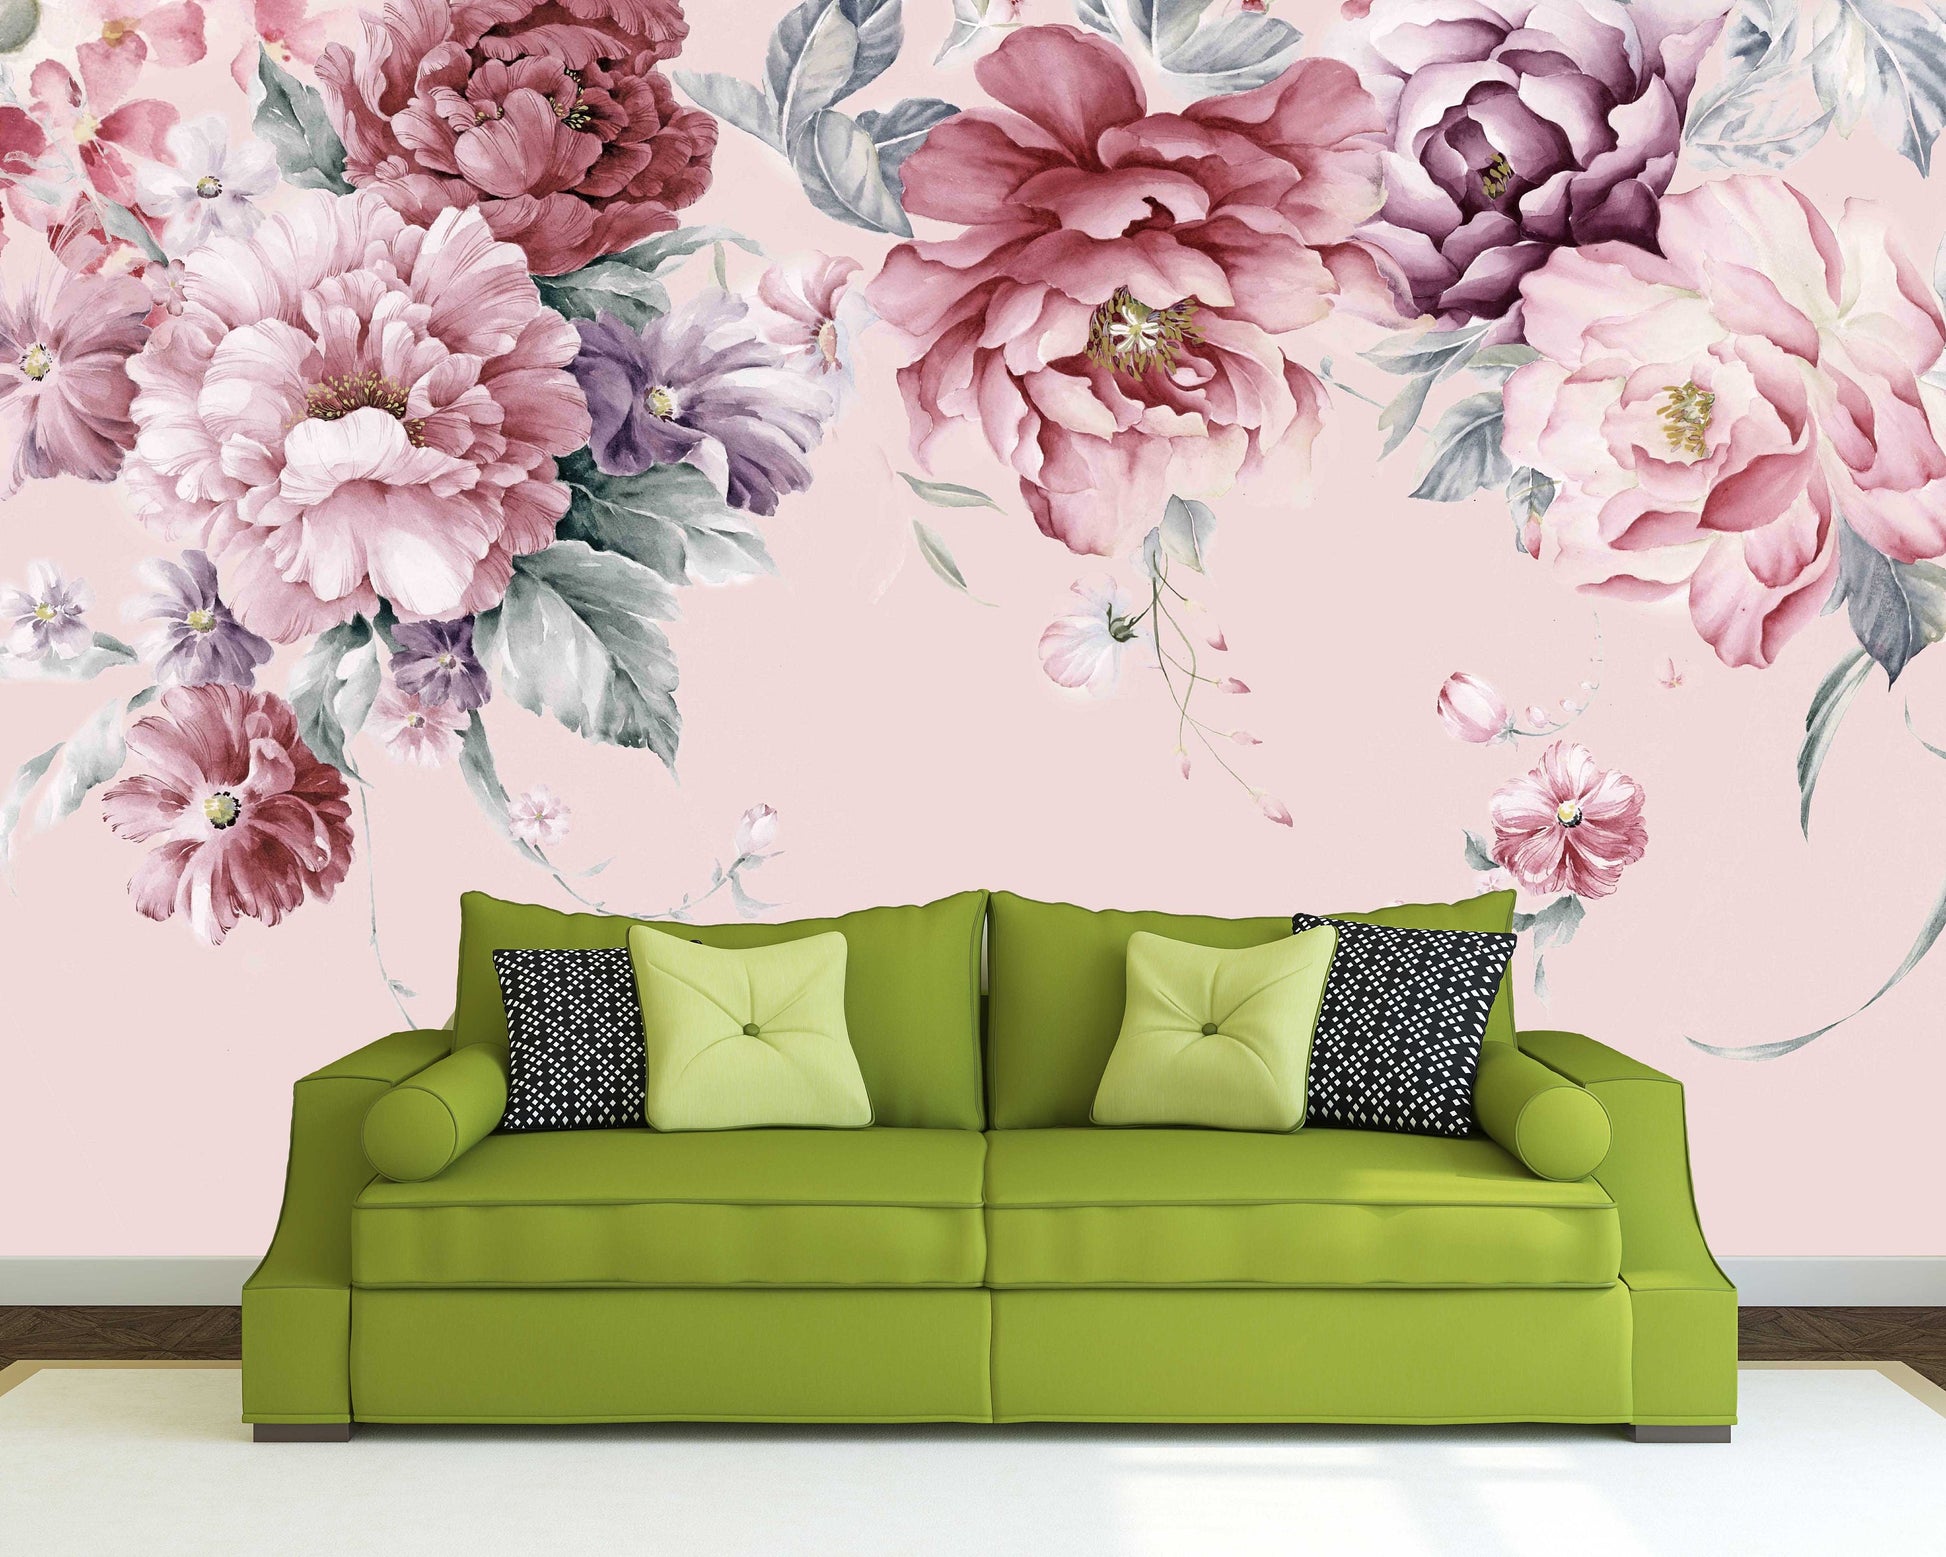 Flowers wallpaper Floral Peel and stick wallpaper Photo wallpaper Textured wallpaper adhesive wallpaper Botanical removable wallpaper